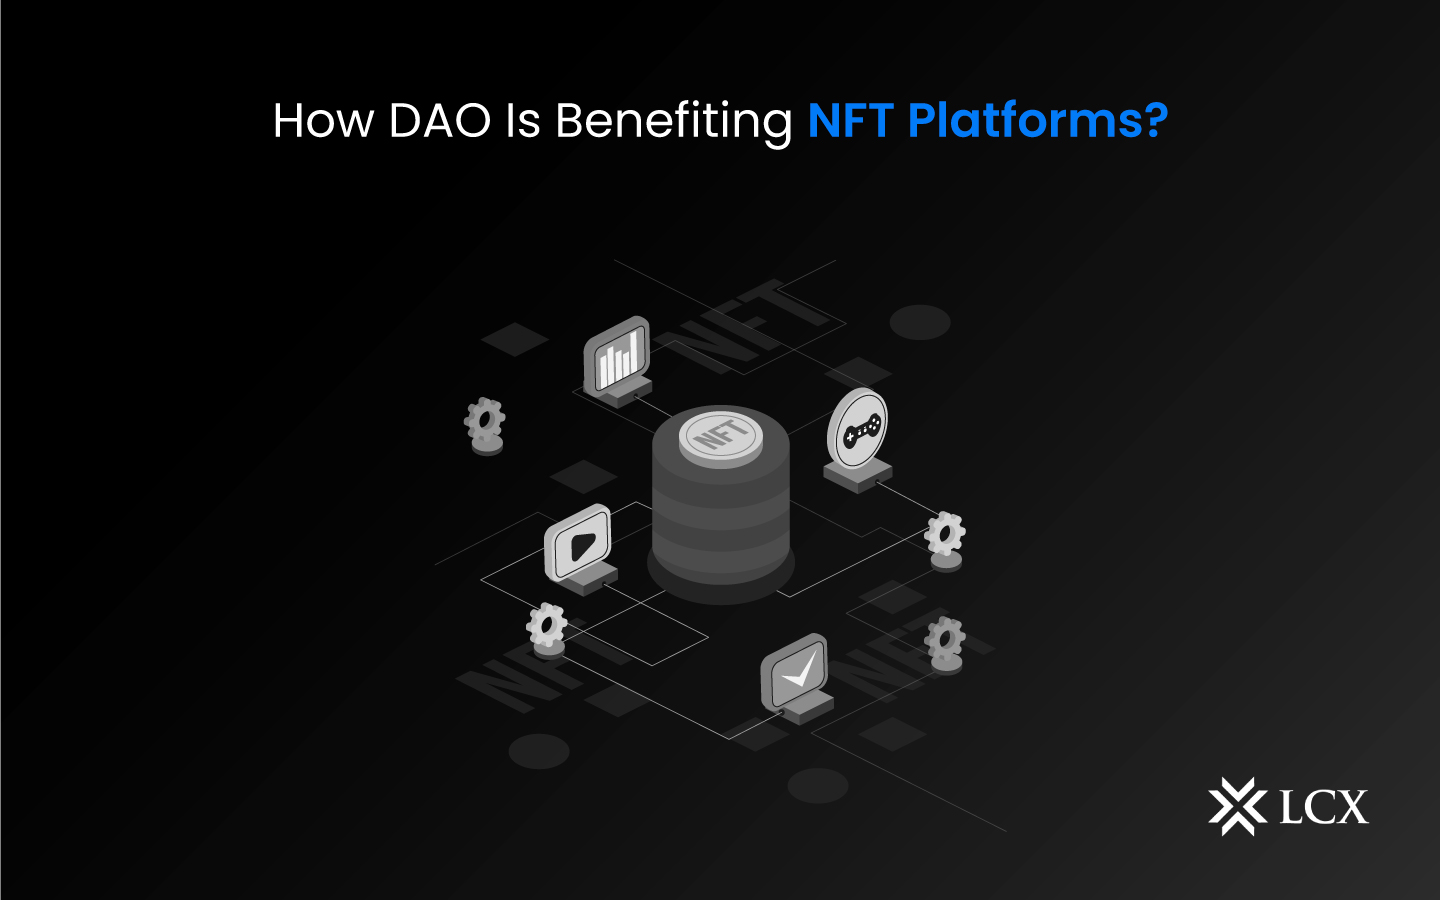 How are DAOs important to the NFT platforms?